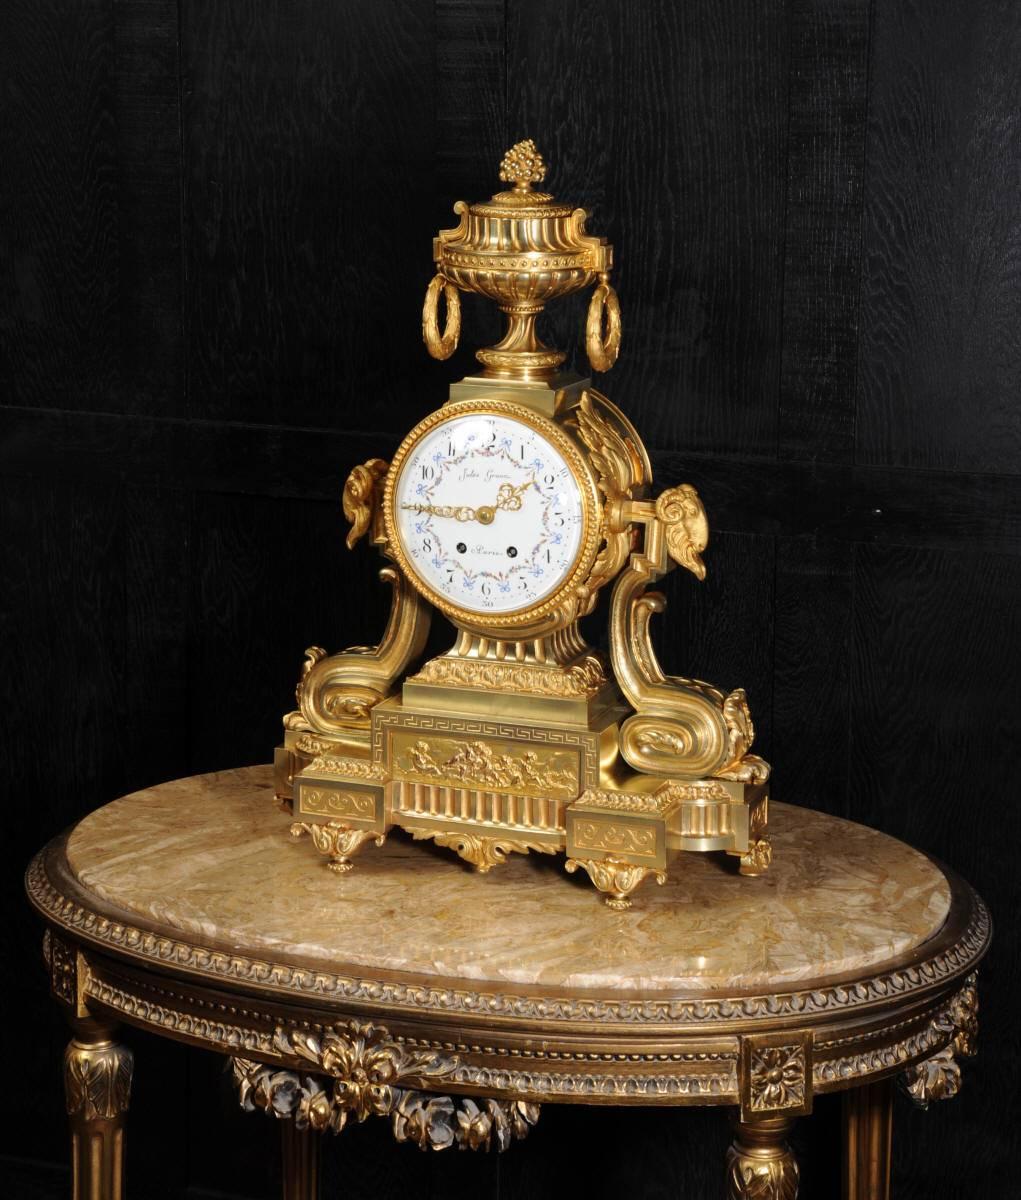 A very large and palatial Louis XVI style ormolu clock by the bronzier Jules Graux. It is of impressive size, beautifully modelled in the classical style of Louis XVI, exquisitely chased laurel leaves, scrolls, ram's head and an urn to the top. This